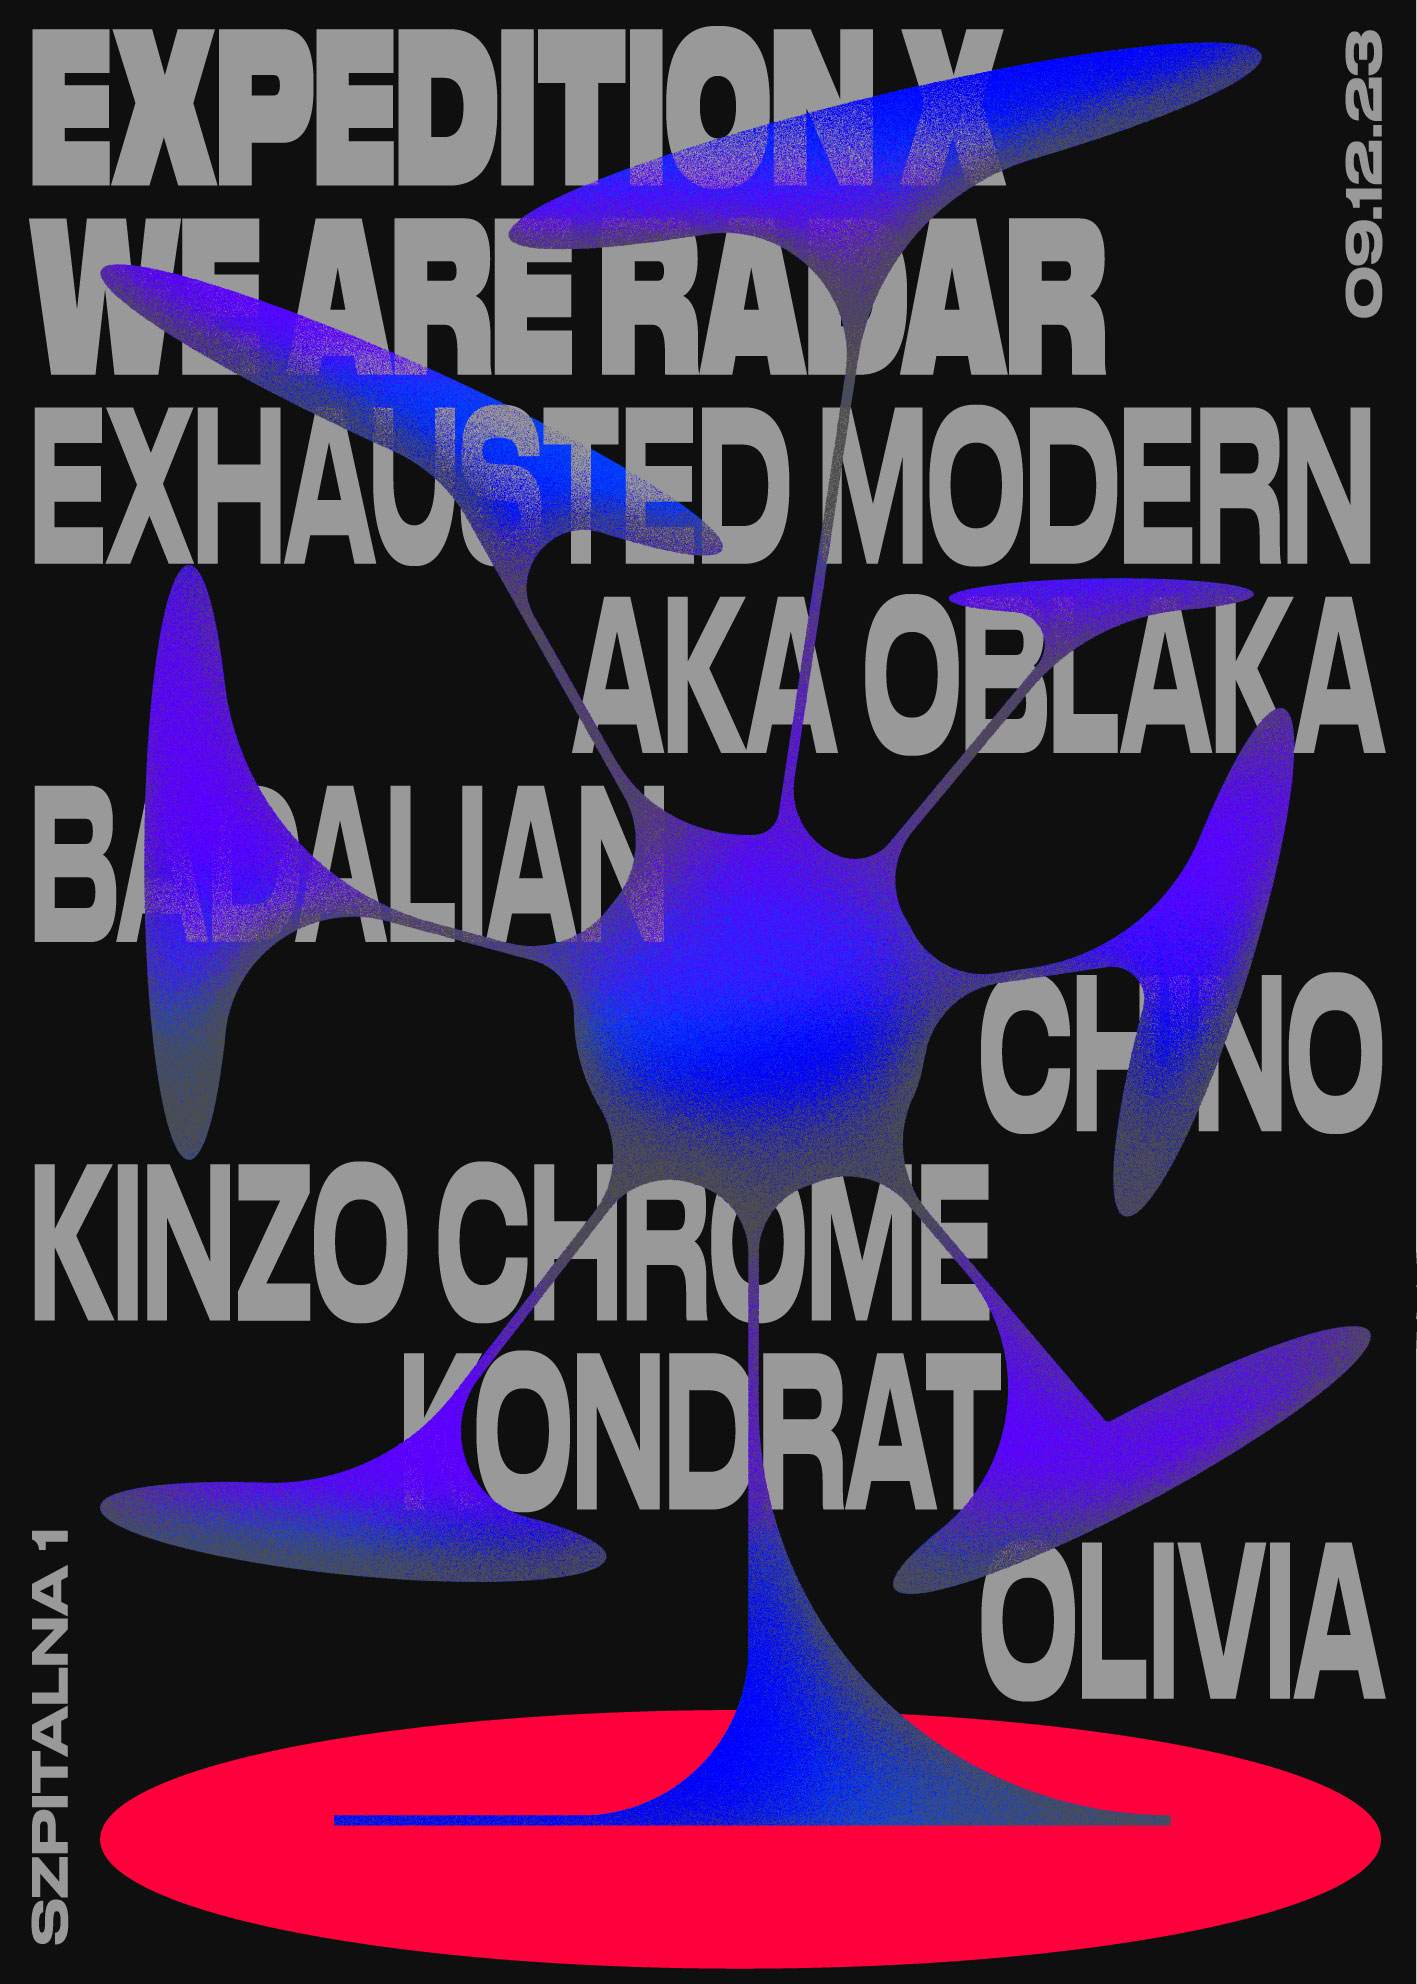 Expedition x We Are Radar / Exhausted Modern aka Oblaka - フライヤー裏